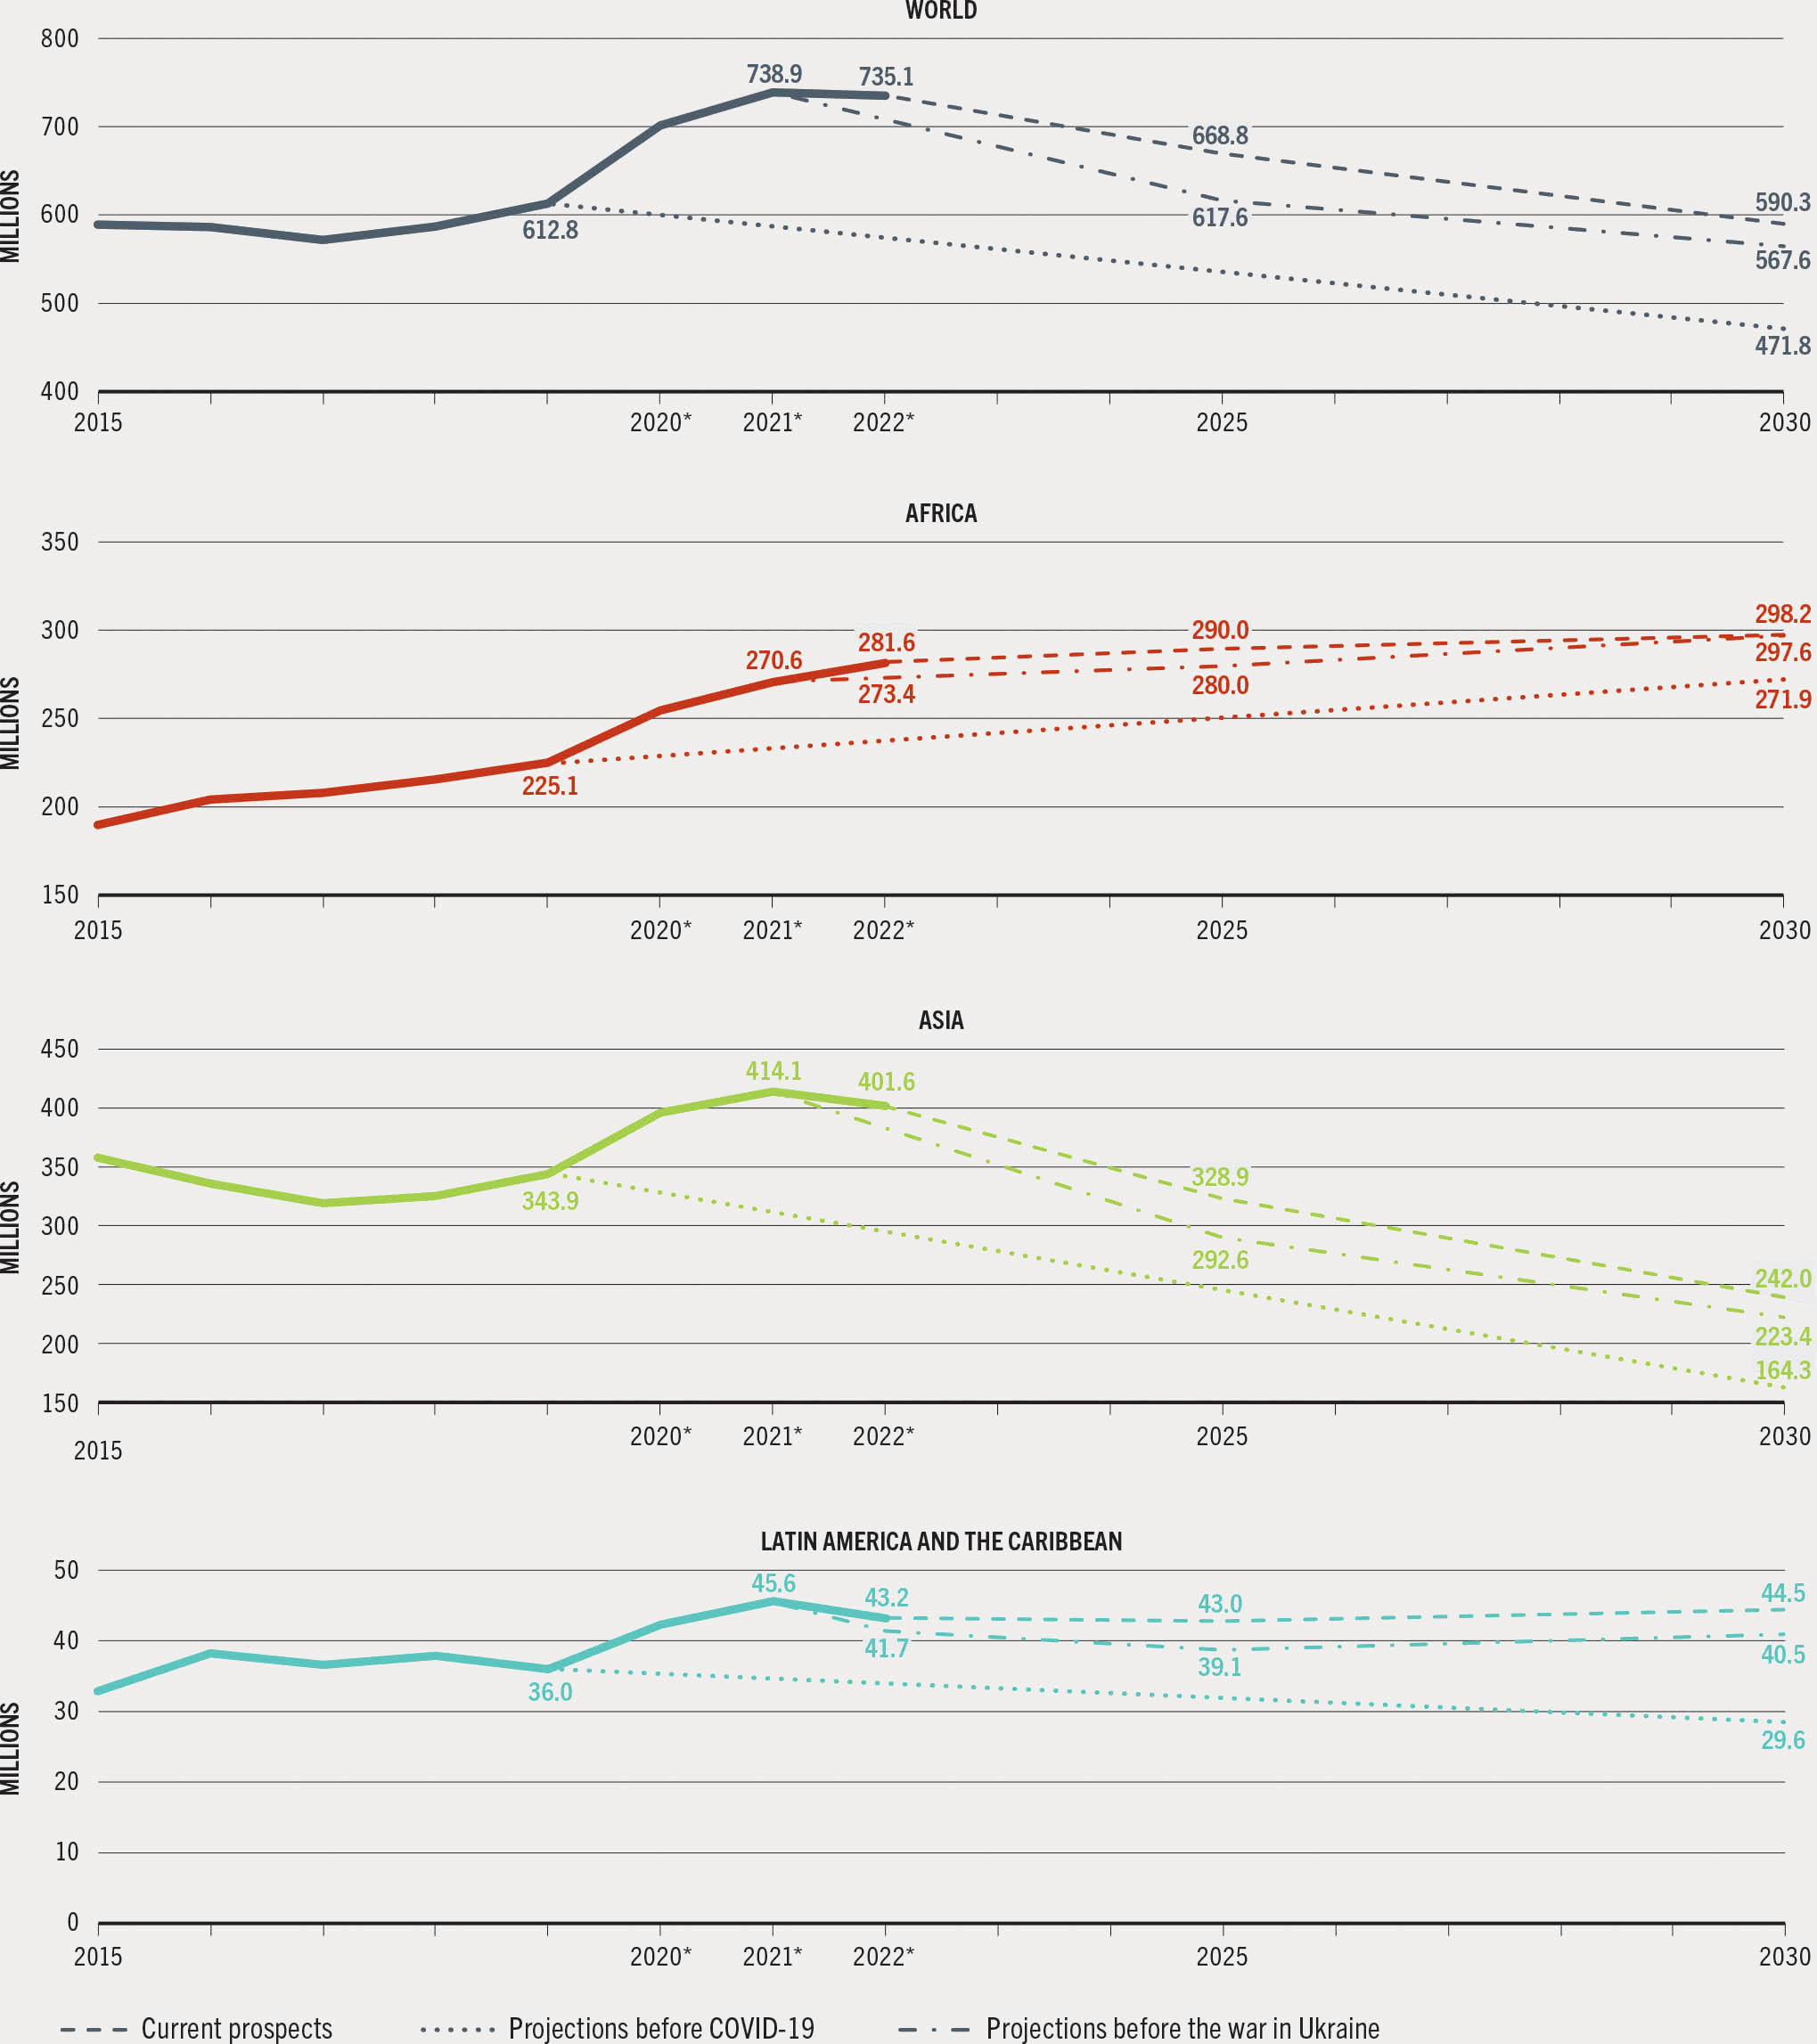 Four graphs projects the numbers of undernourished in the world and in different regions.